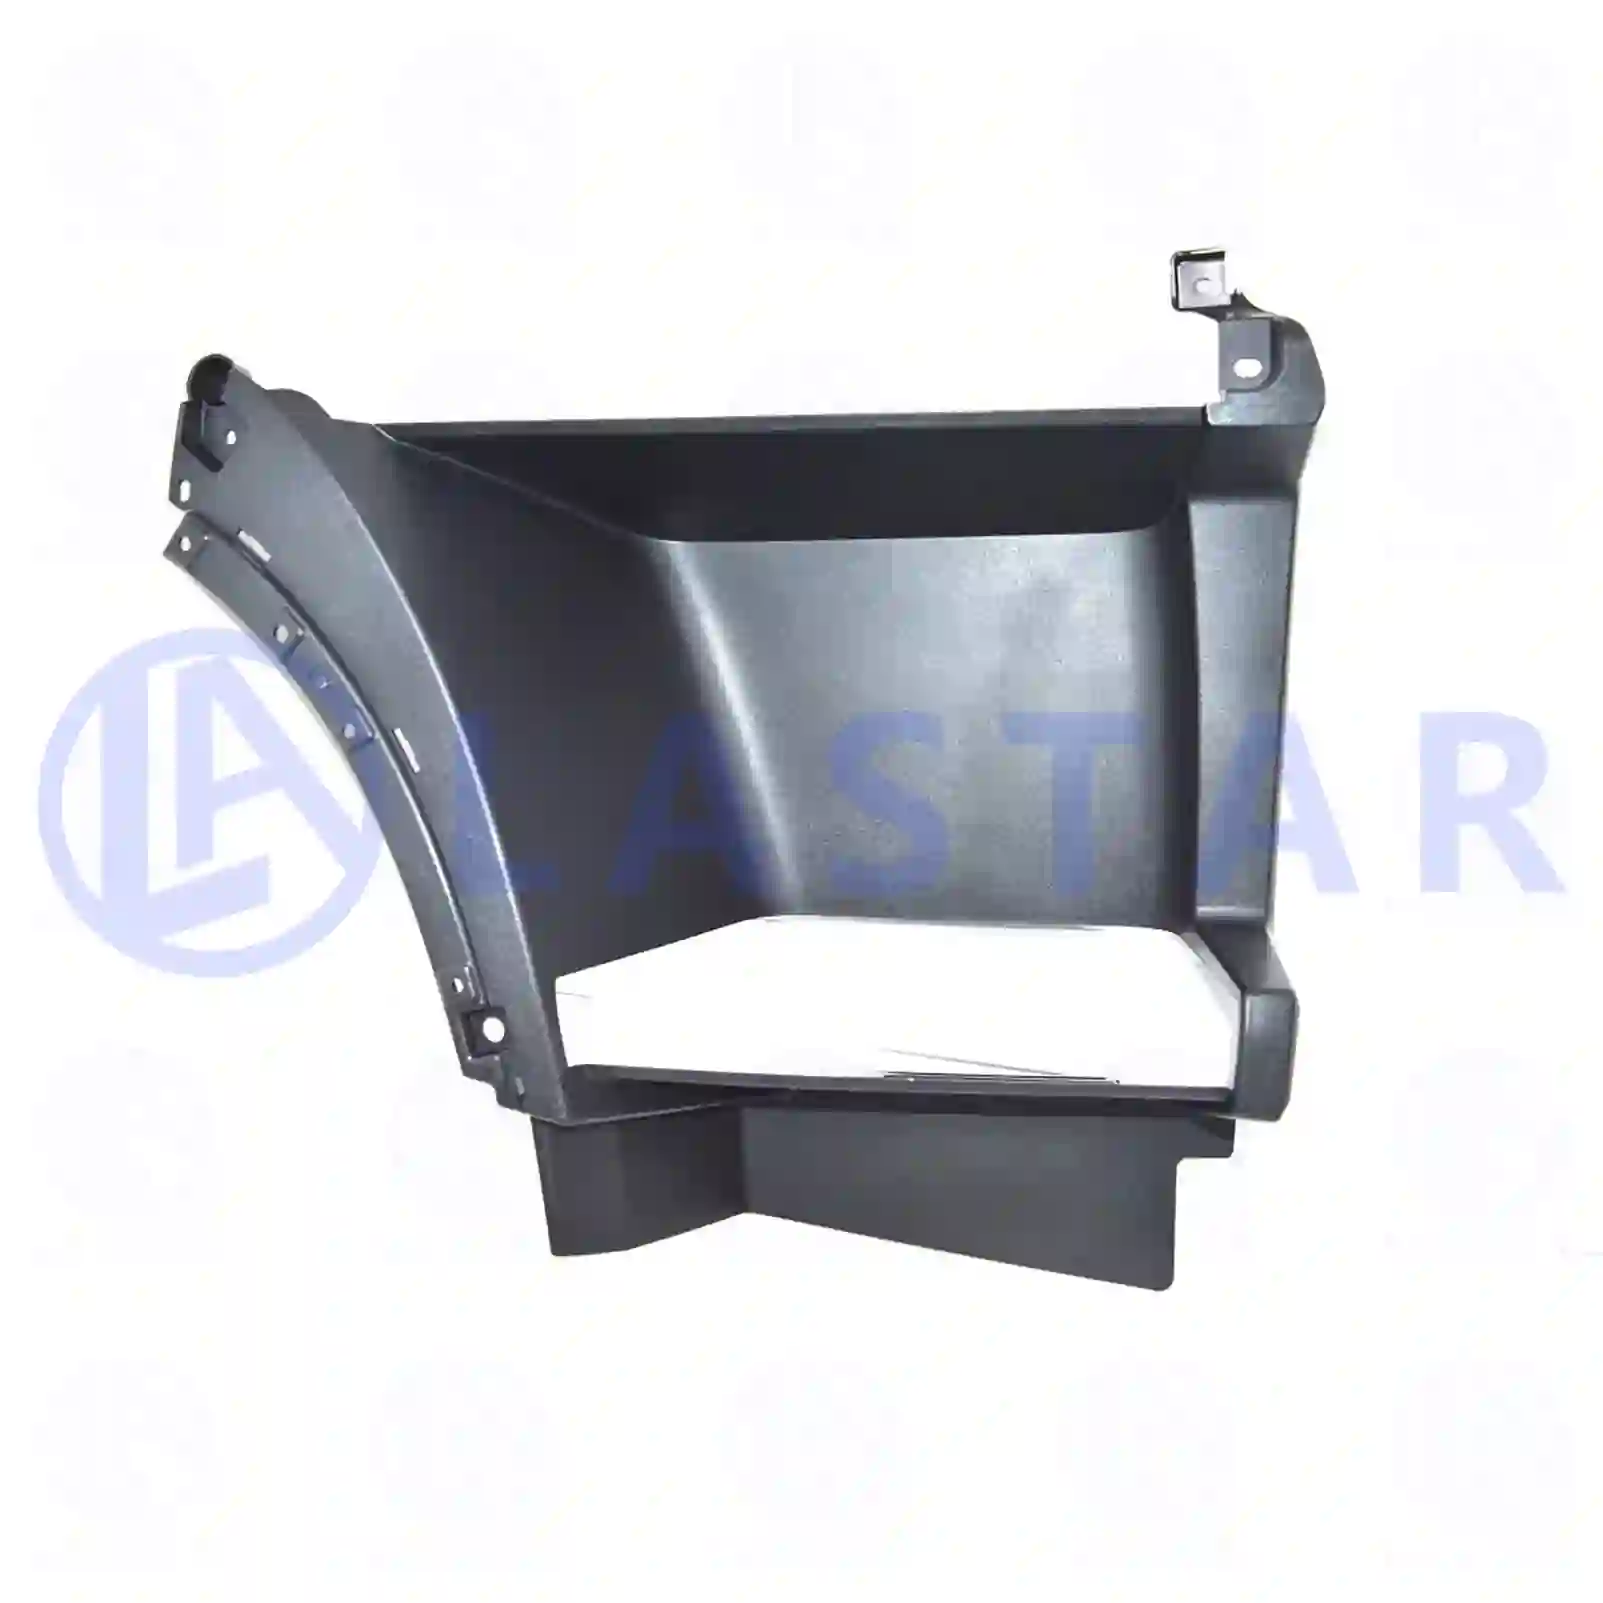 Boarding Step Step well case, right, la no: 77721097 ,  oem no:82141521 Lastar Spare Part | Truck Spare Parts, Auotomotive Spare Parts